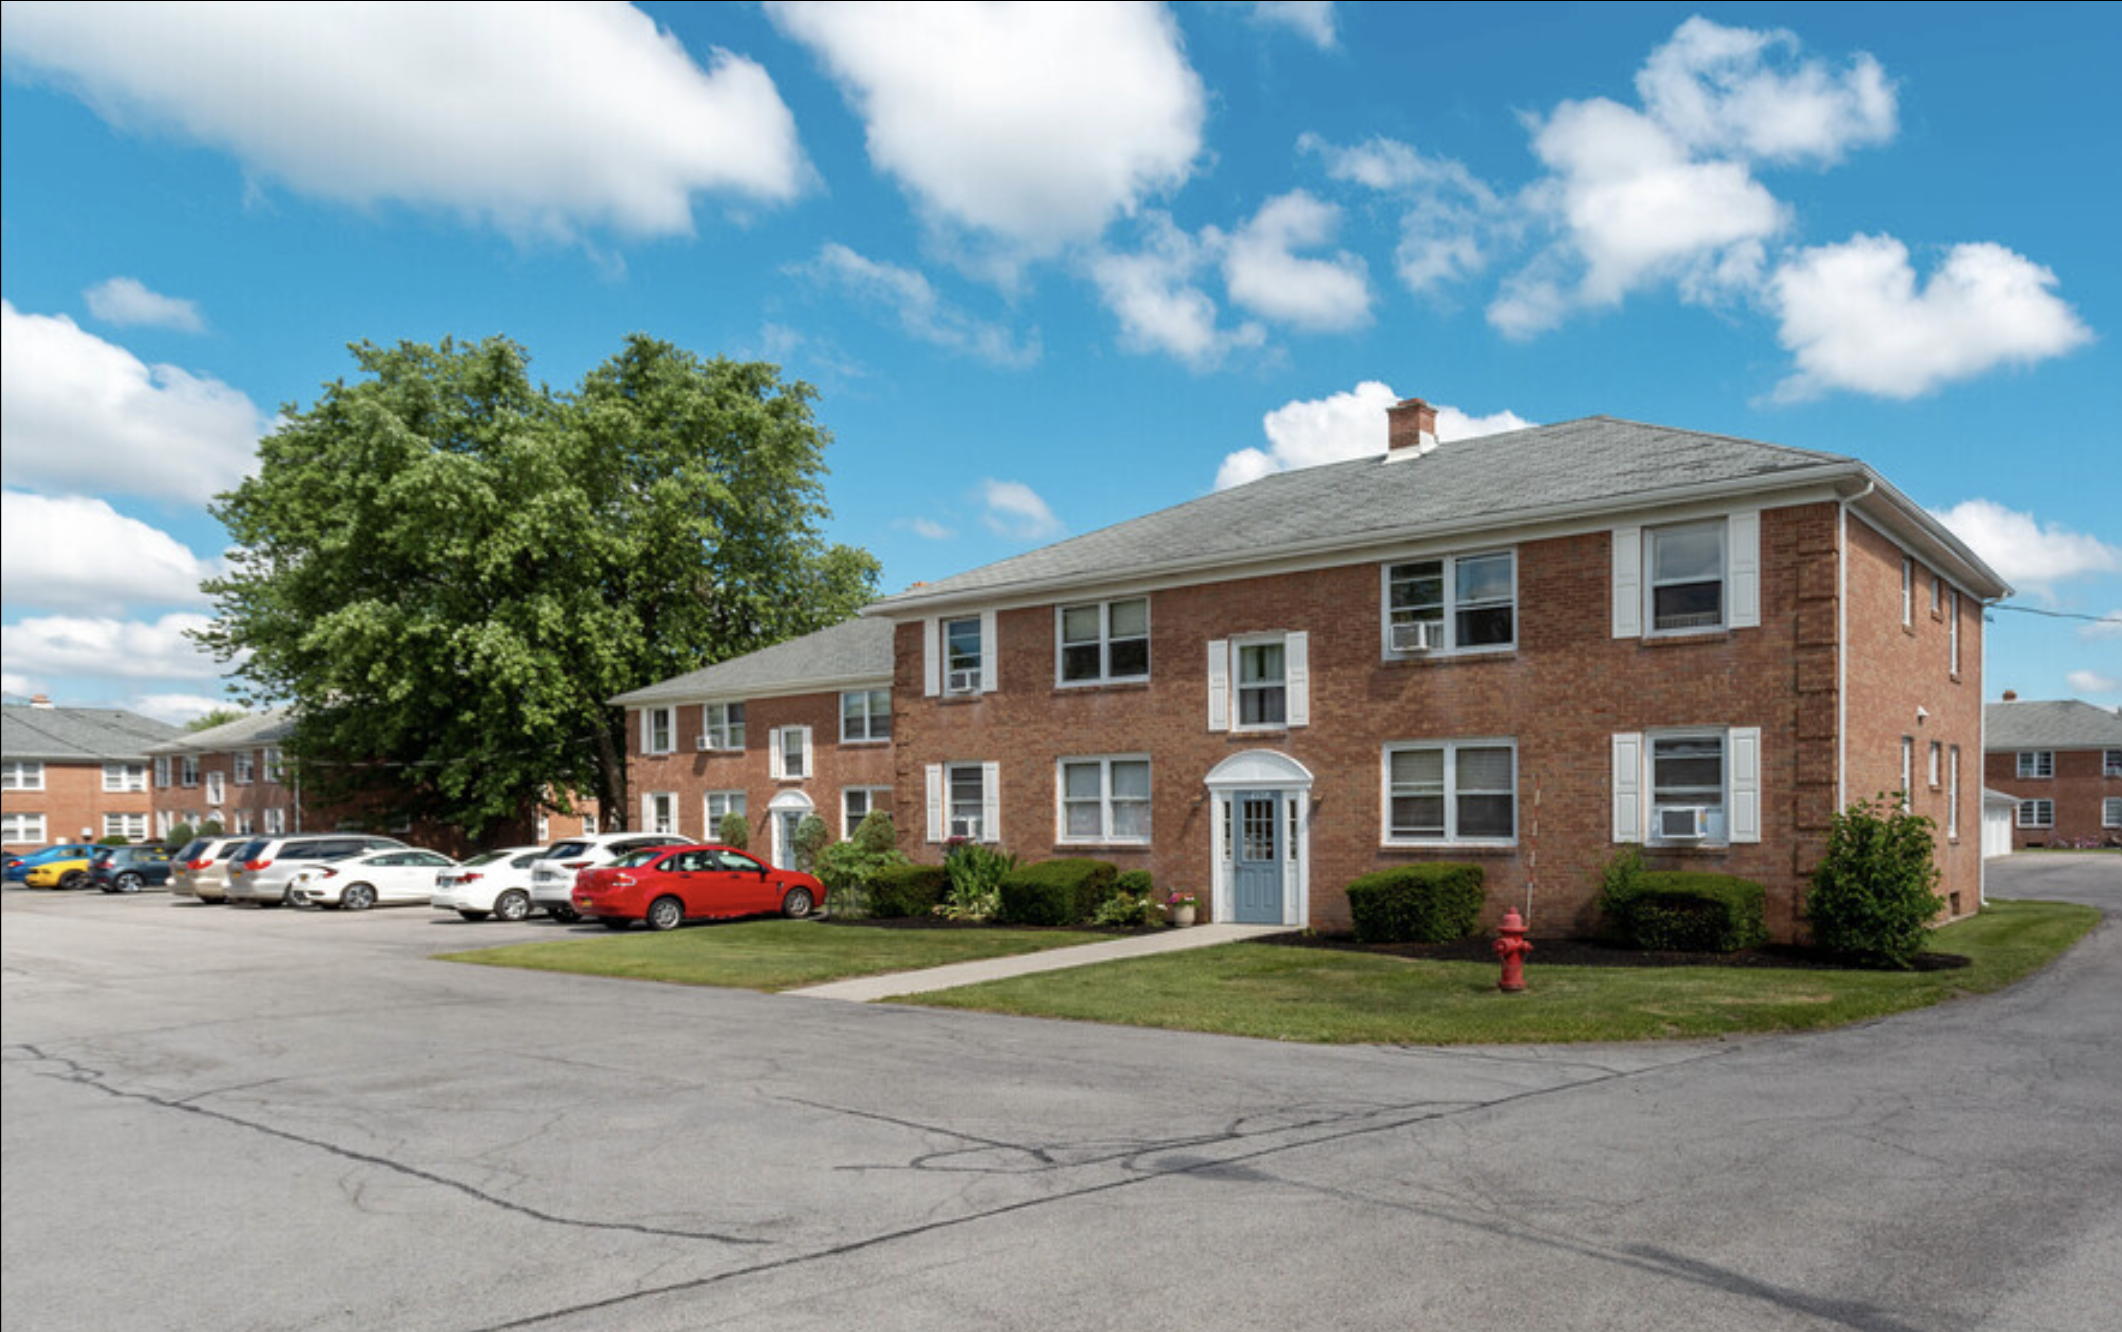 Drexel Hill Apartment Complex in Williamsville, NY